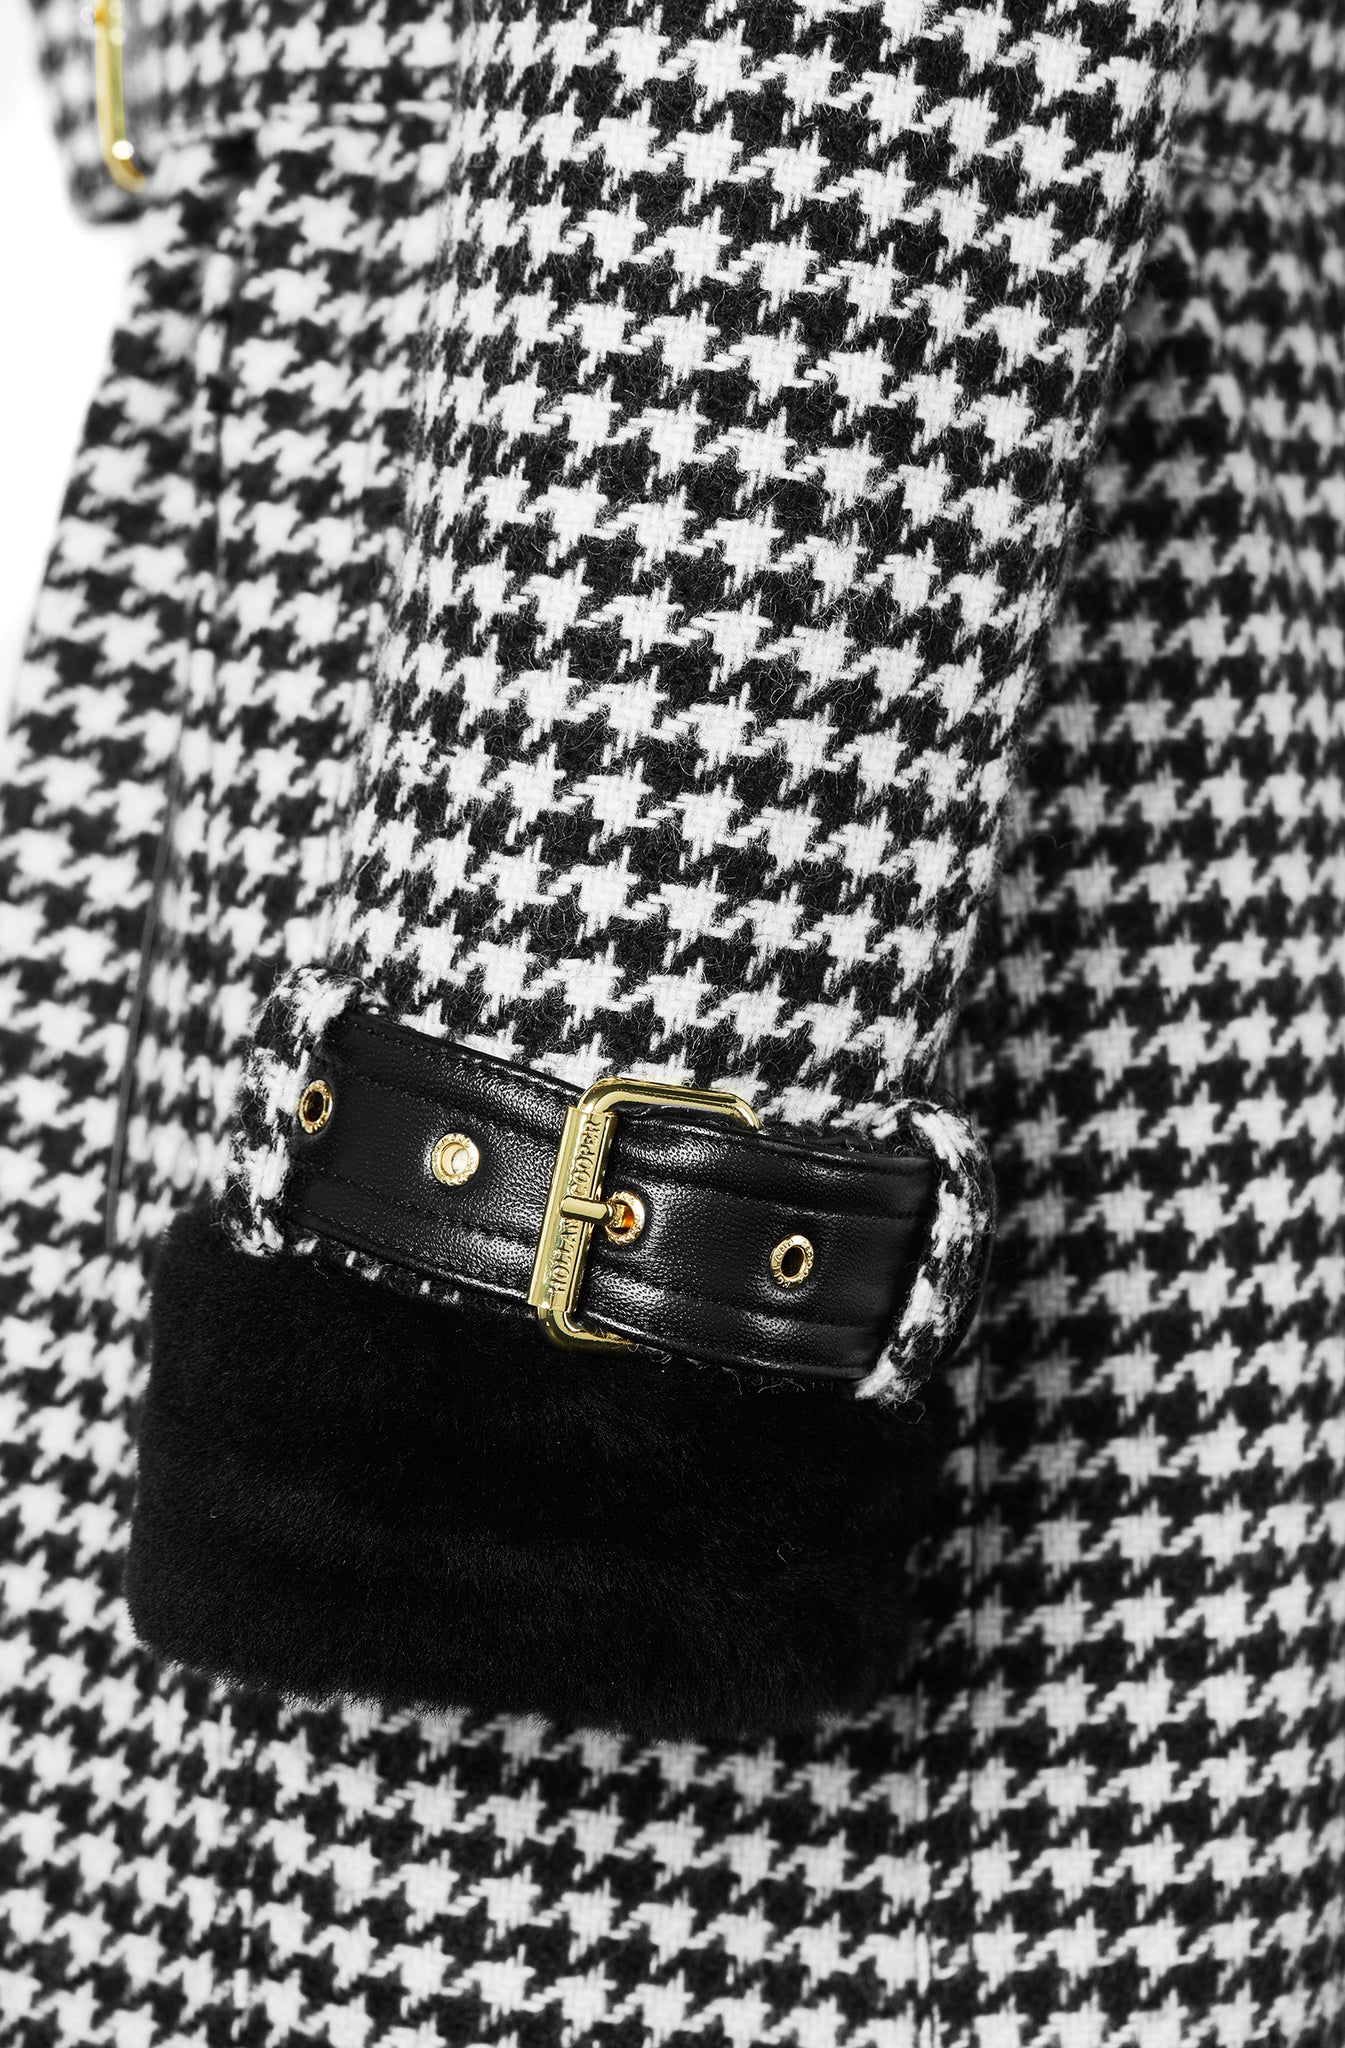 Cuff detail on womens black and white houndstooth double breasted full length trench coat with black faux fur collar and cuffs